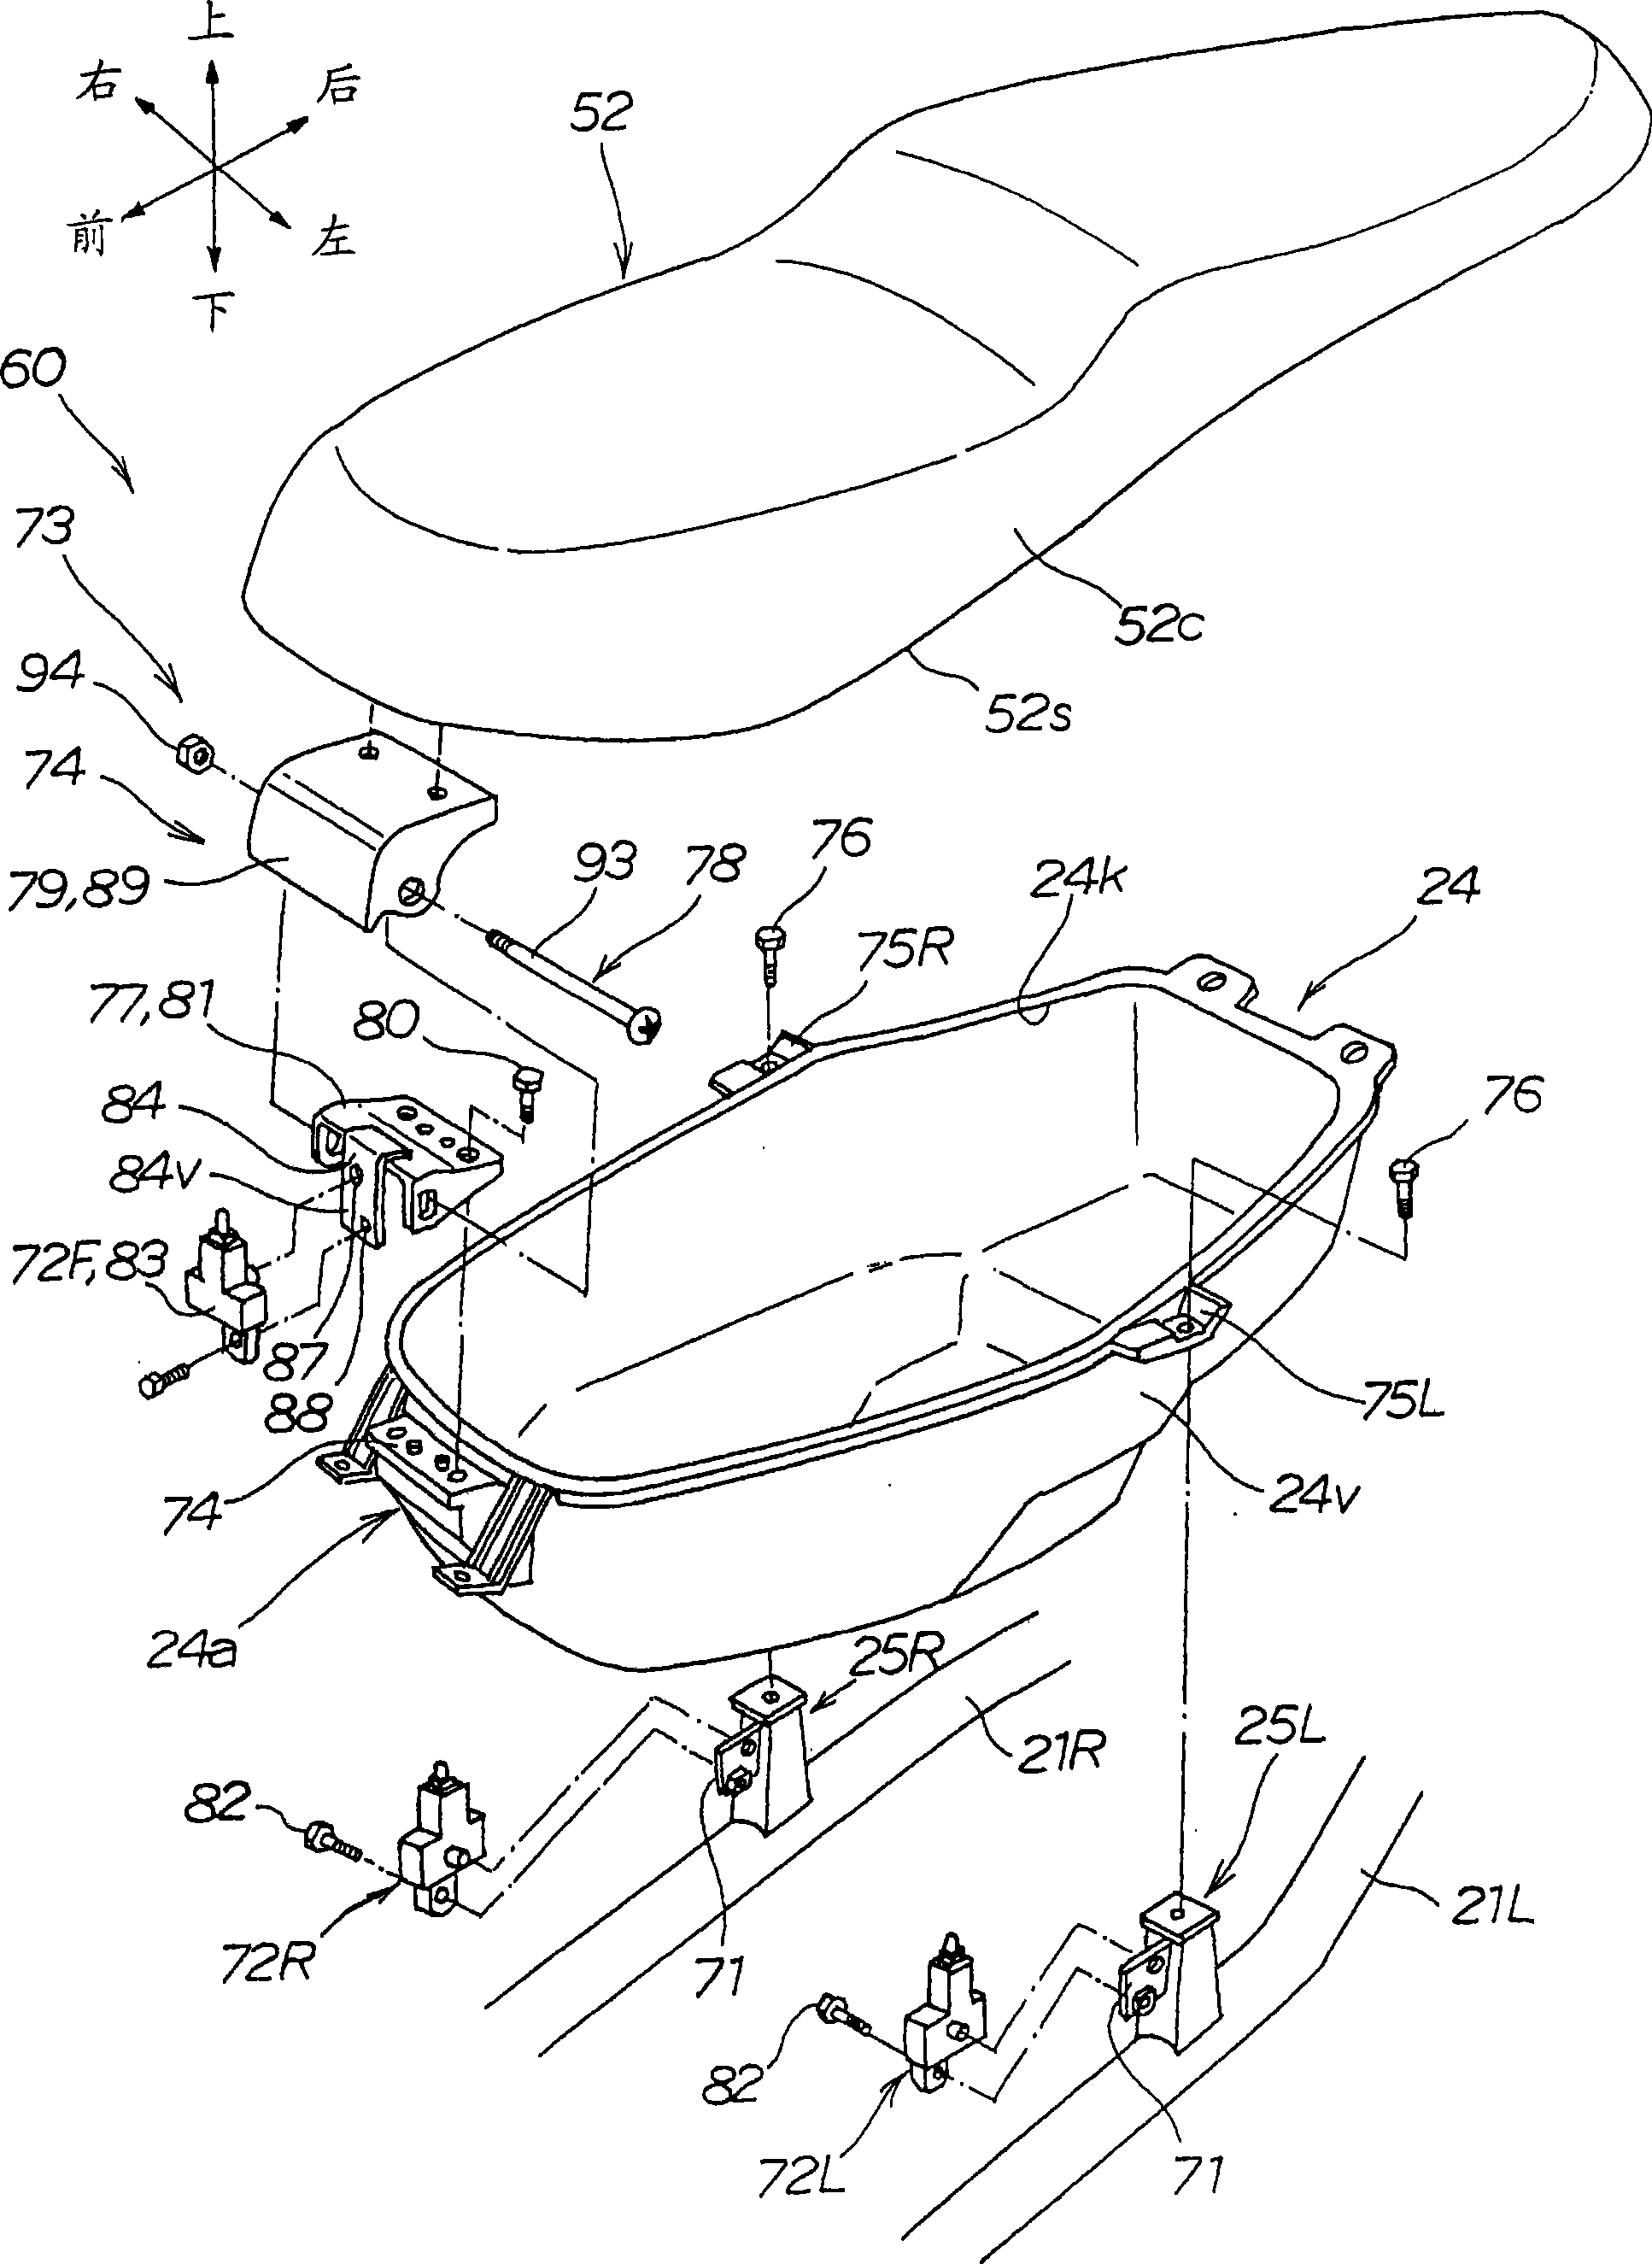 Boarding detection structure for vehicle